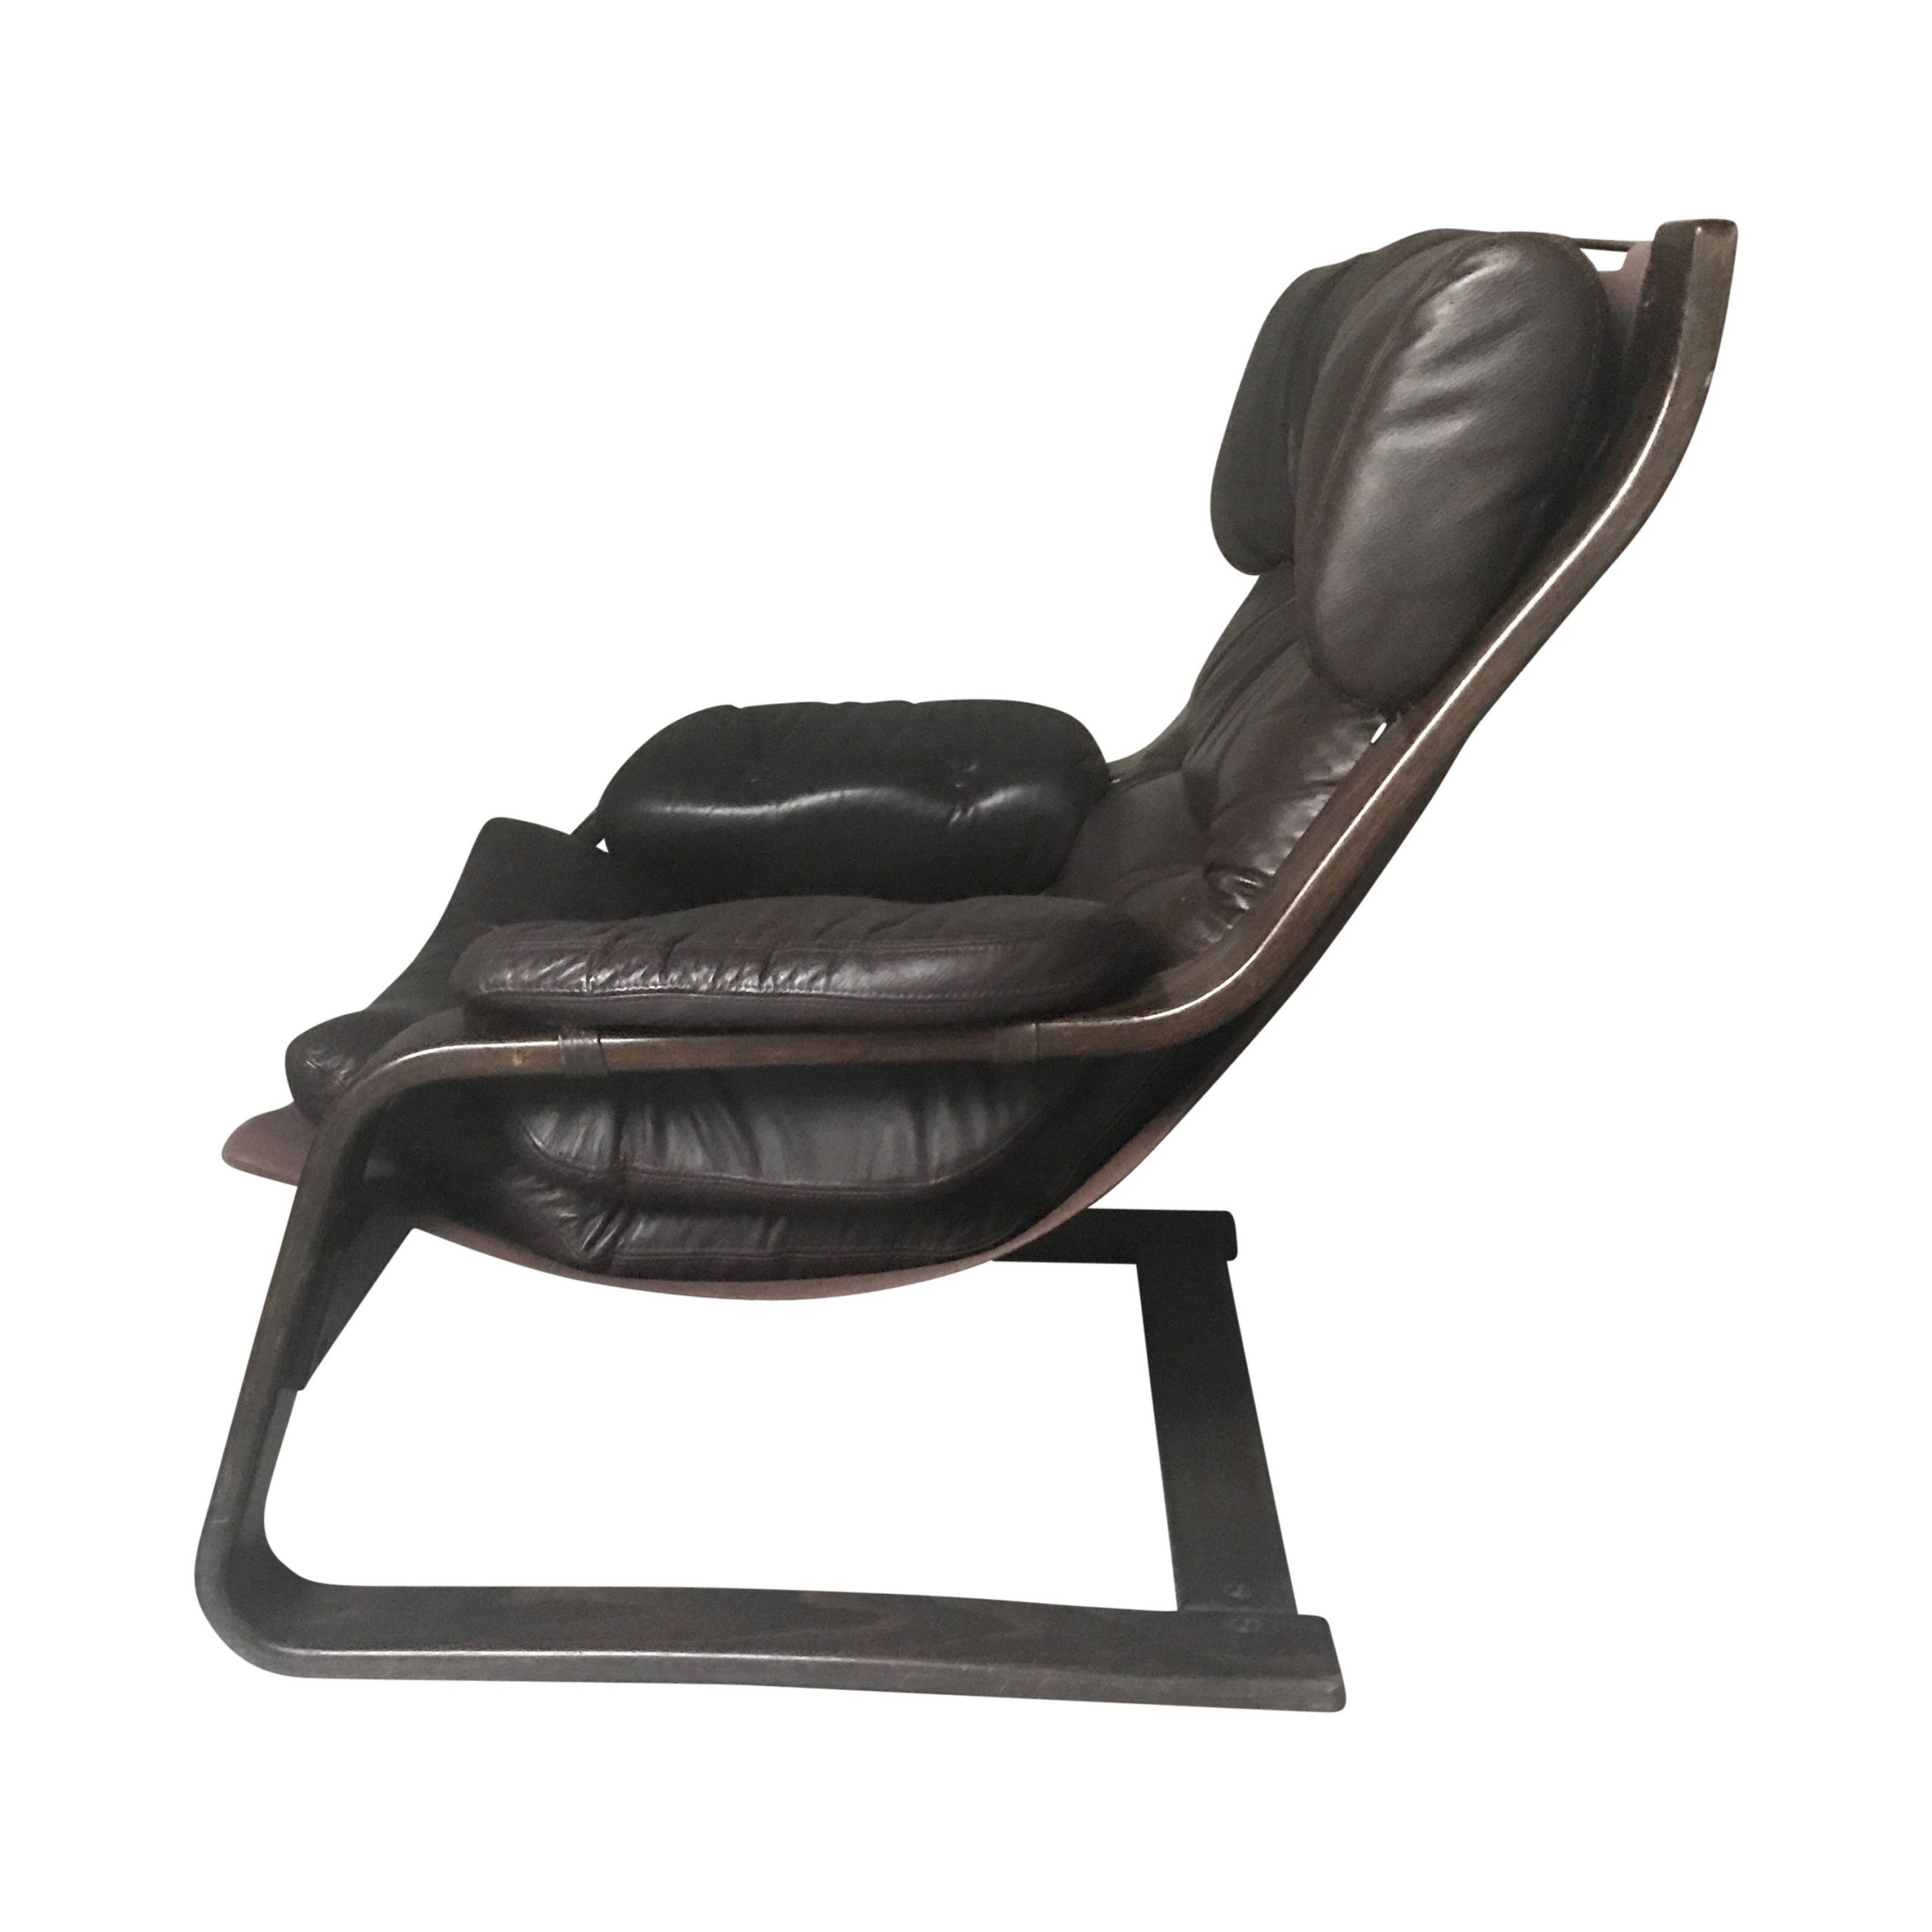 vintage-leather-and-wood-recliner-armchair-by-gote-mobel-sweden-1970s3-scaled-1.jpeg